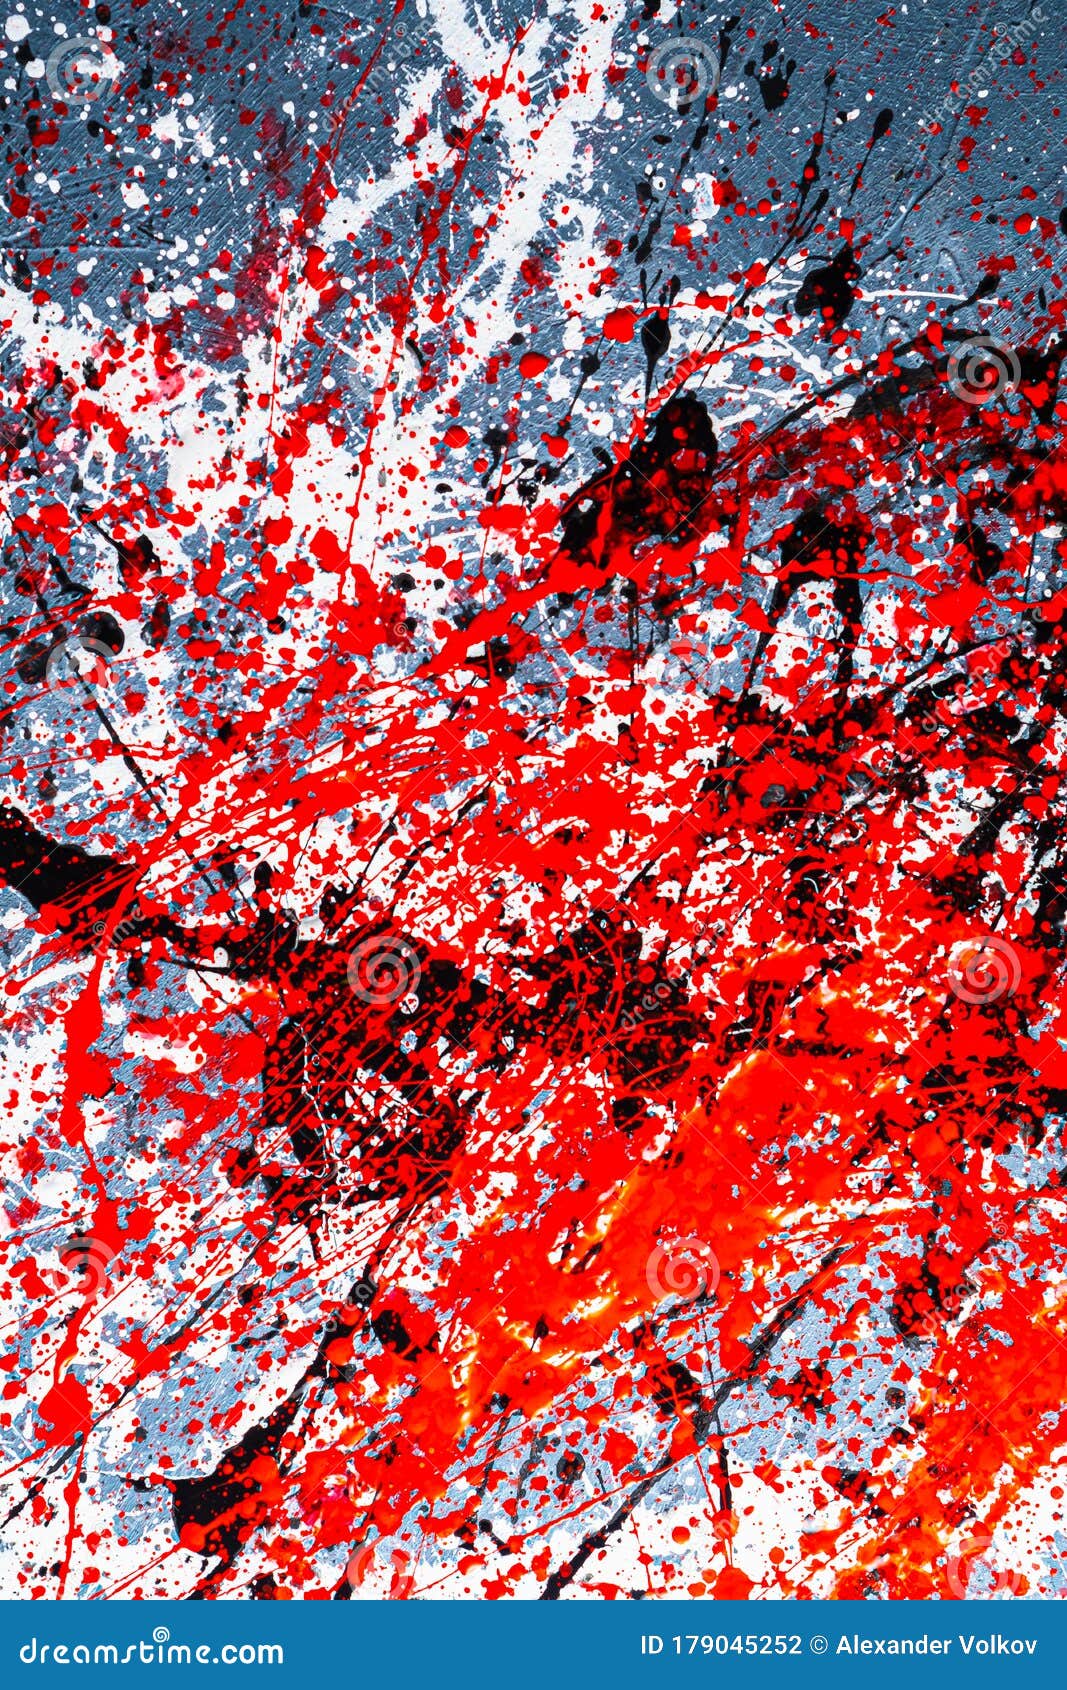 Bright Background Graphic Image. Dripping. Expression. Mixing Colors. Black  White Red. on the Concrete Texture. Vertcal Stock Illustration -  Illustration of confusion, inspiration: 179045252